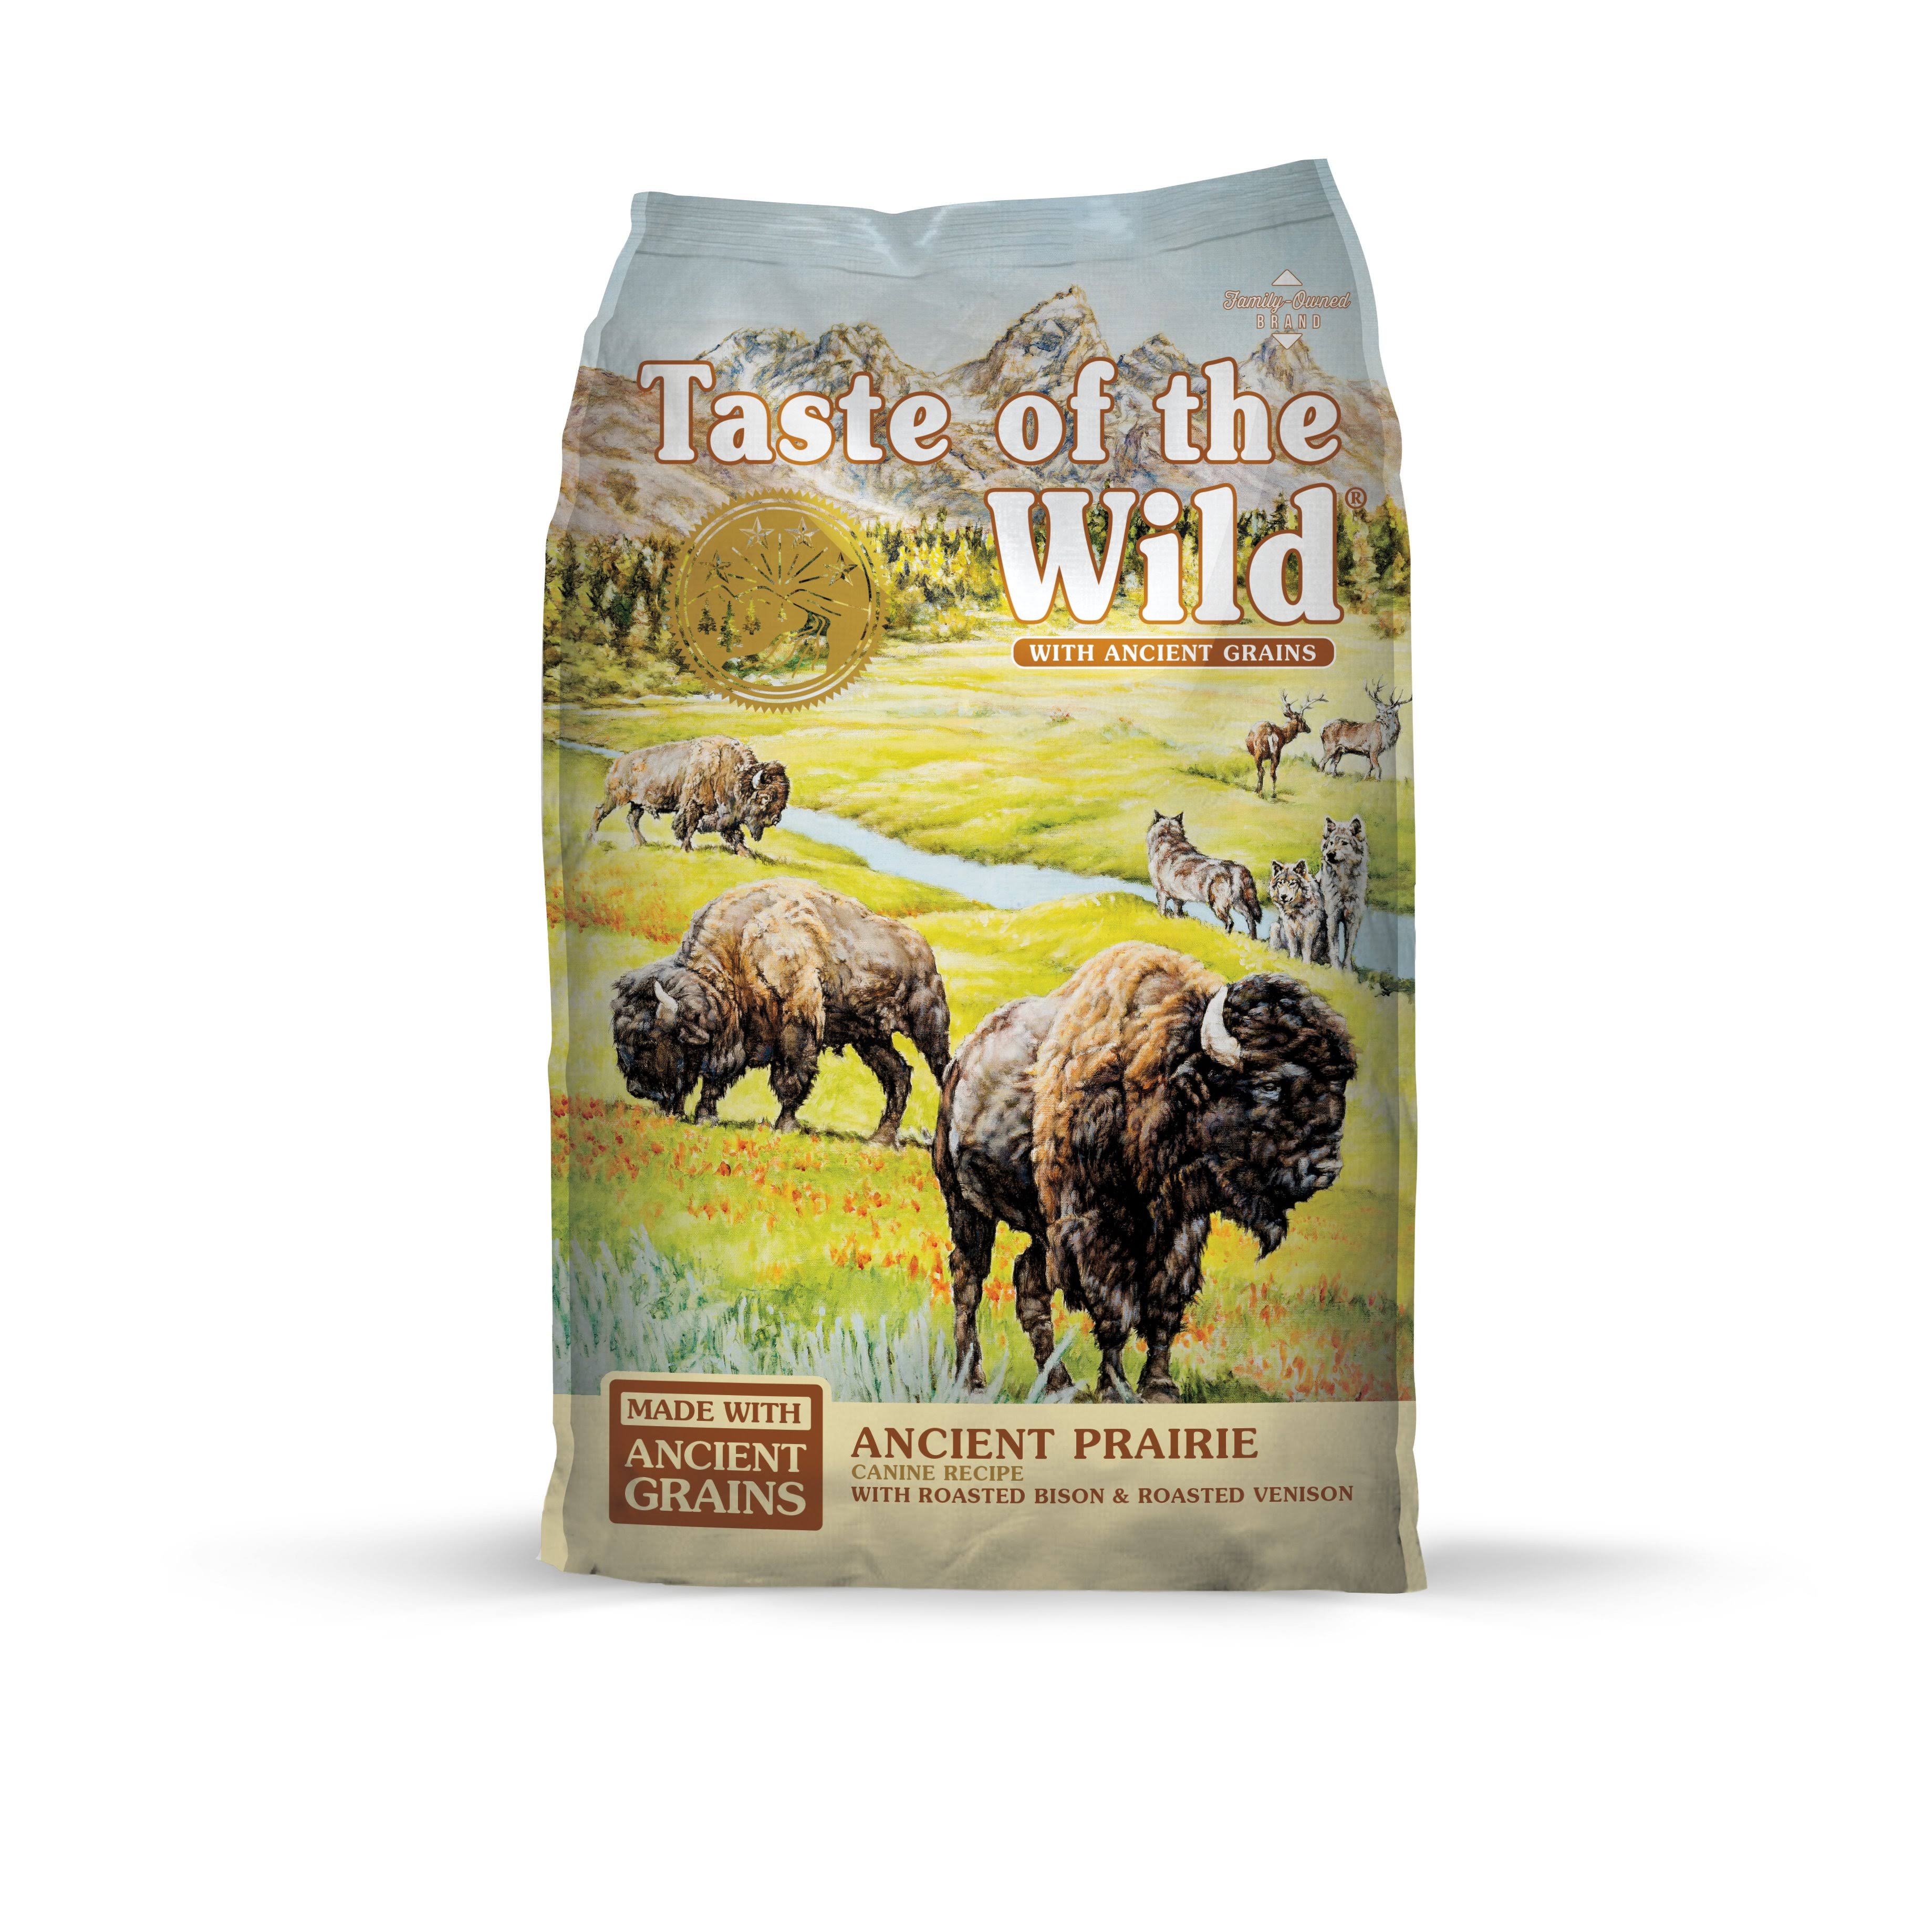 Taste of The Wild Ancient Prairie with Ancient Grains Dry Dog Food - 5 lbs.